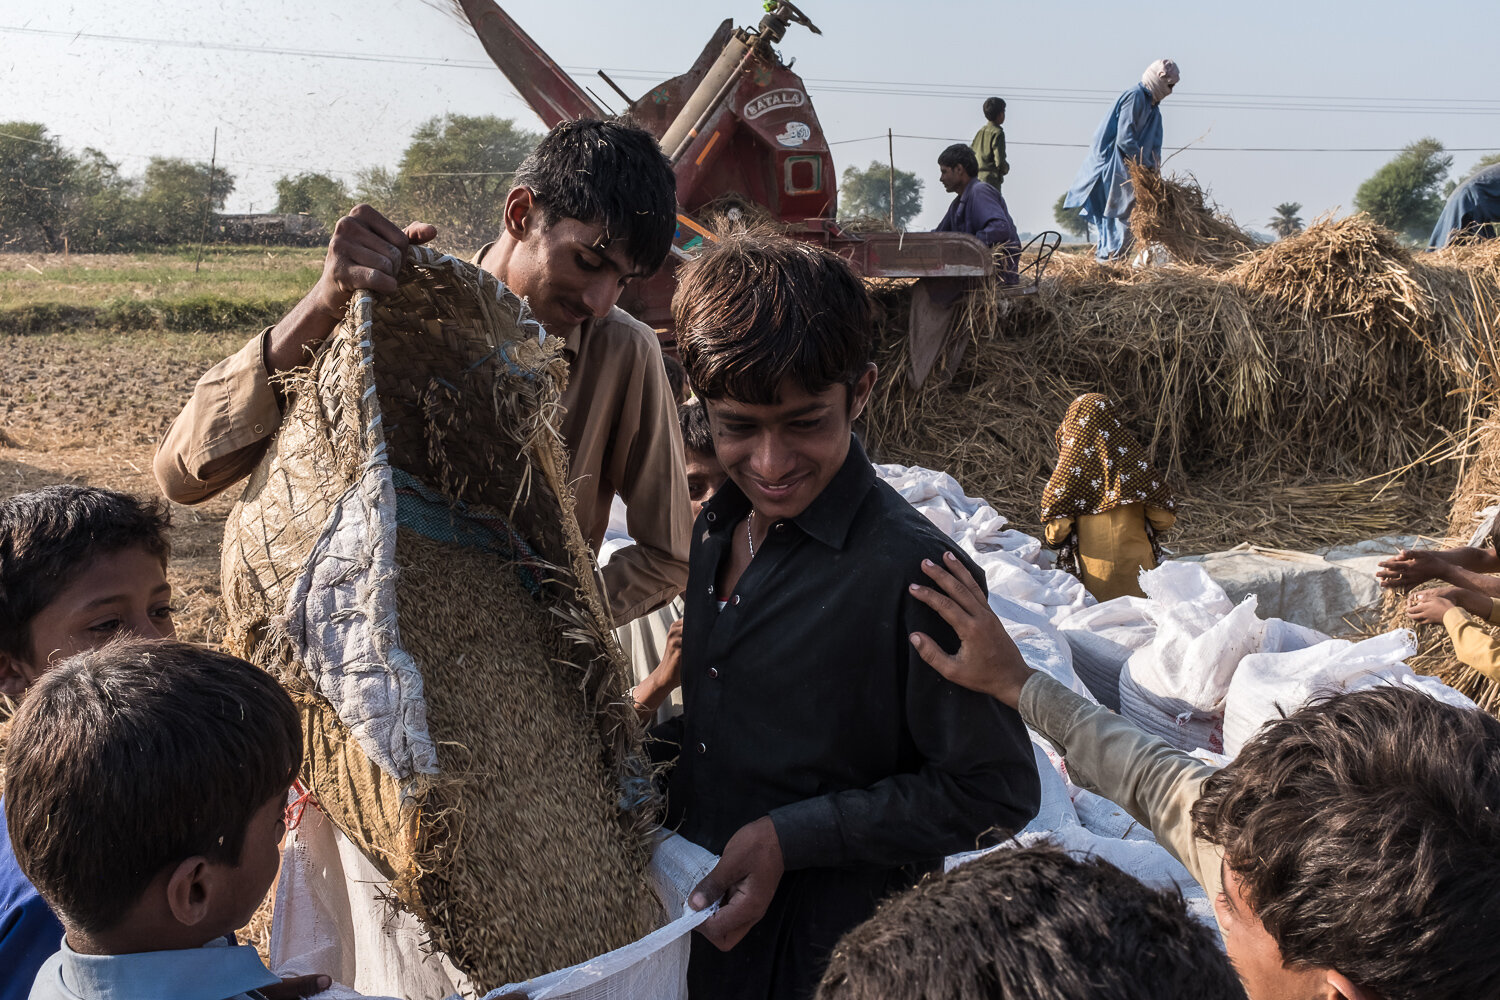  Local villagers, most of whom belong to one extended family, threshing rice on Tuesday, November 28, 2017 in Khairpur Nathan Shah, Sindh, Pakistan. Sindh receives little rain outside of the monsoon season, and most agriculture is made possible by ir